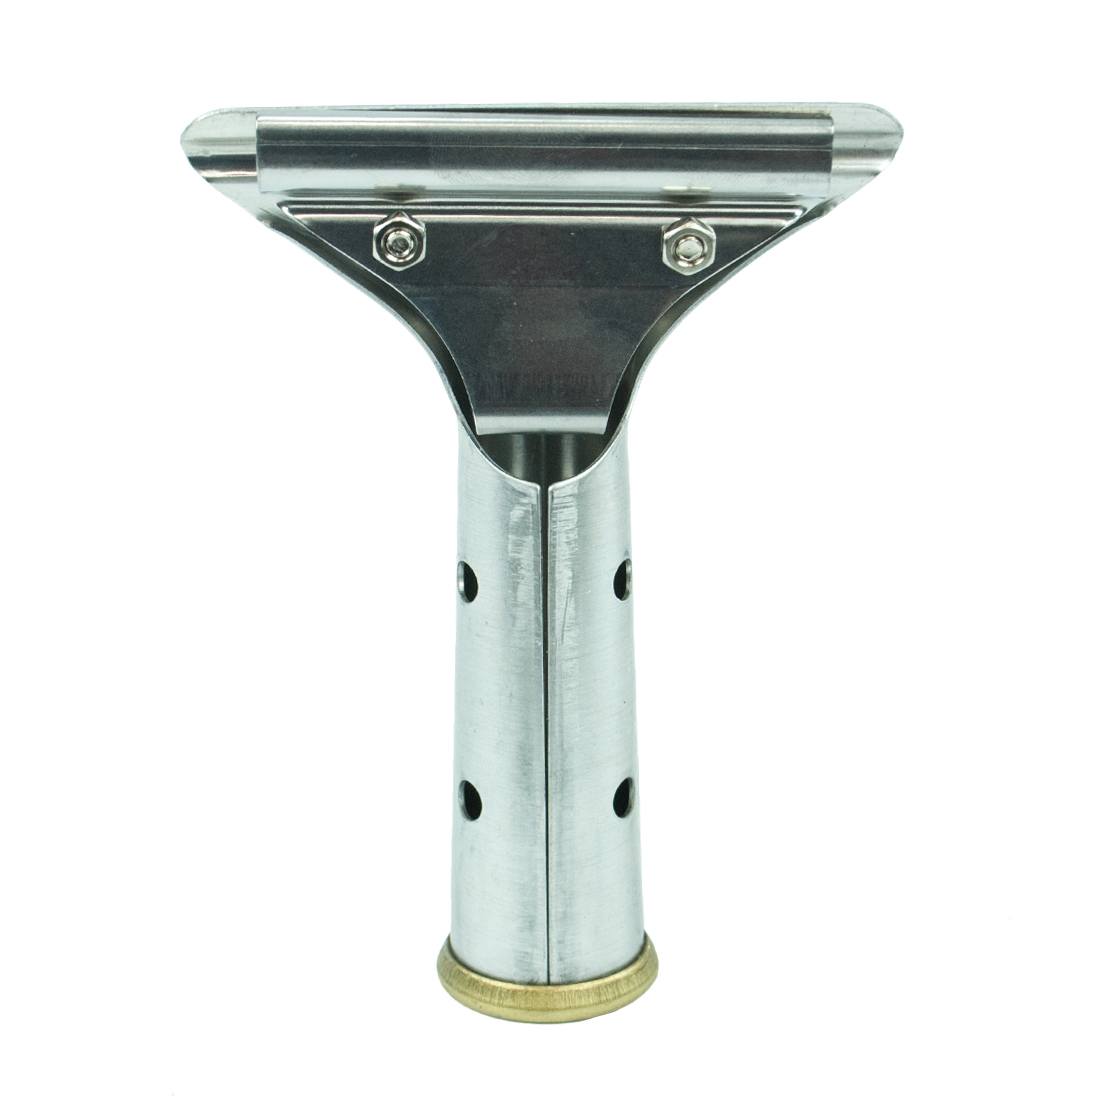 Pulex UltraLite Aluminum Squeegee Handle - Left Side View